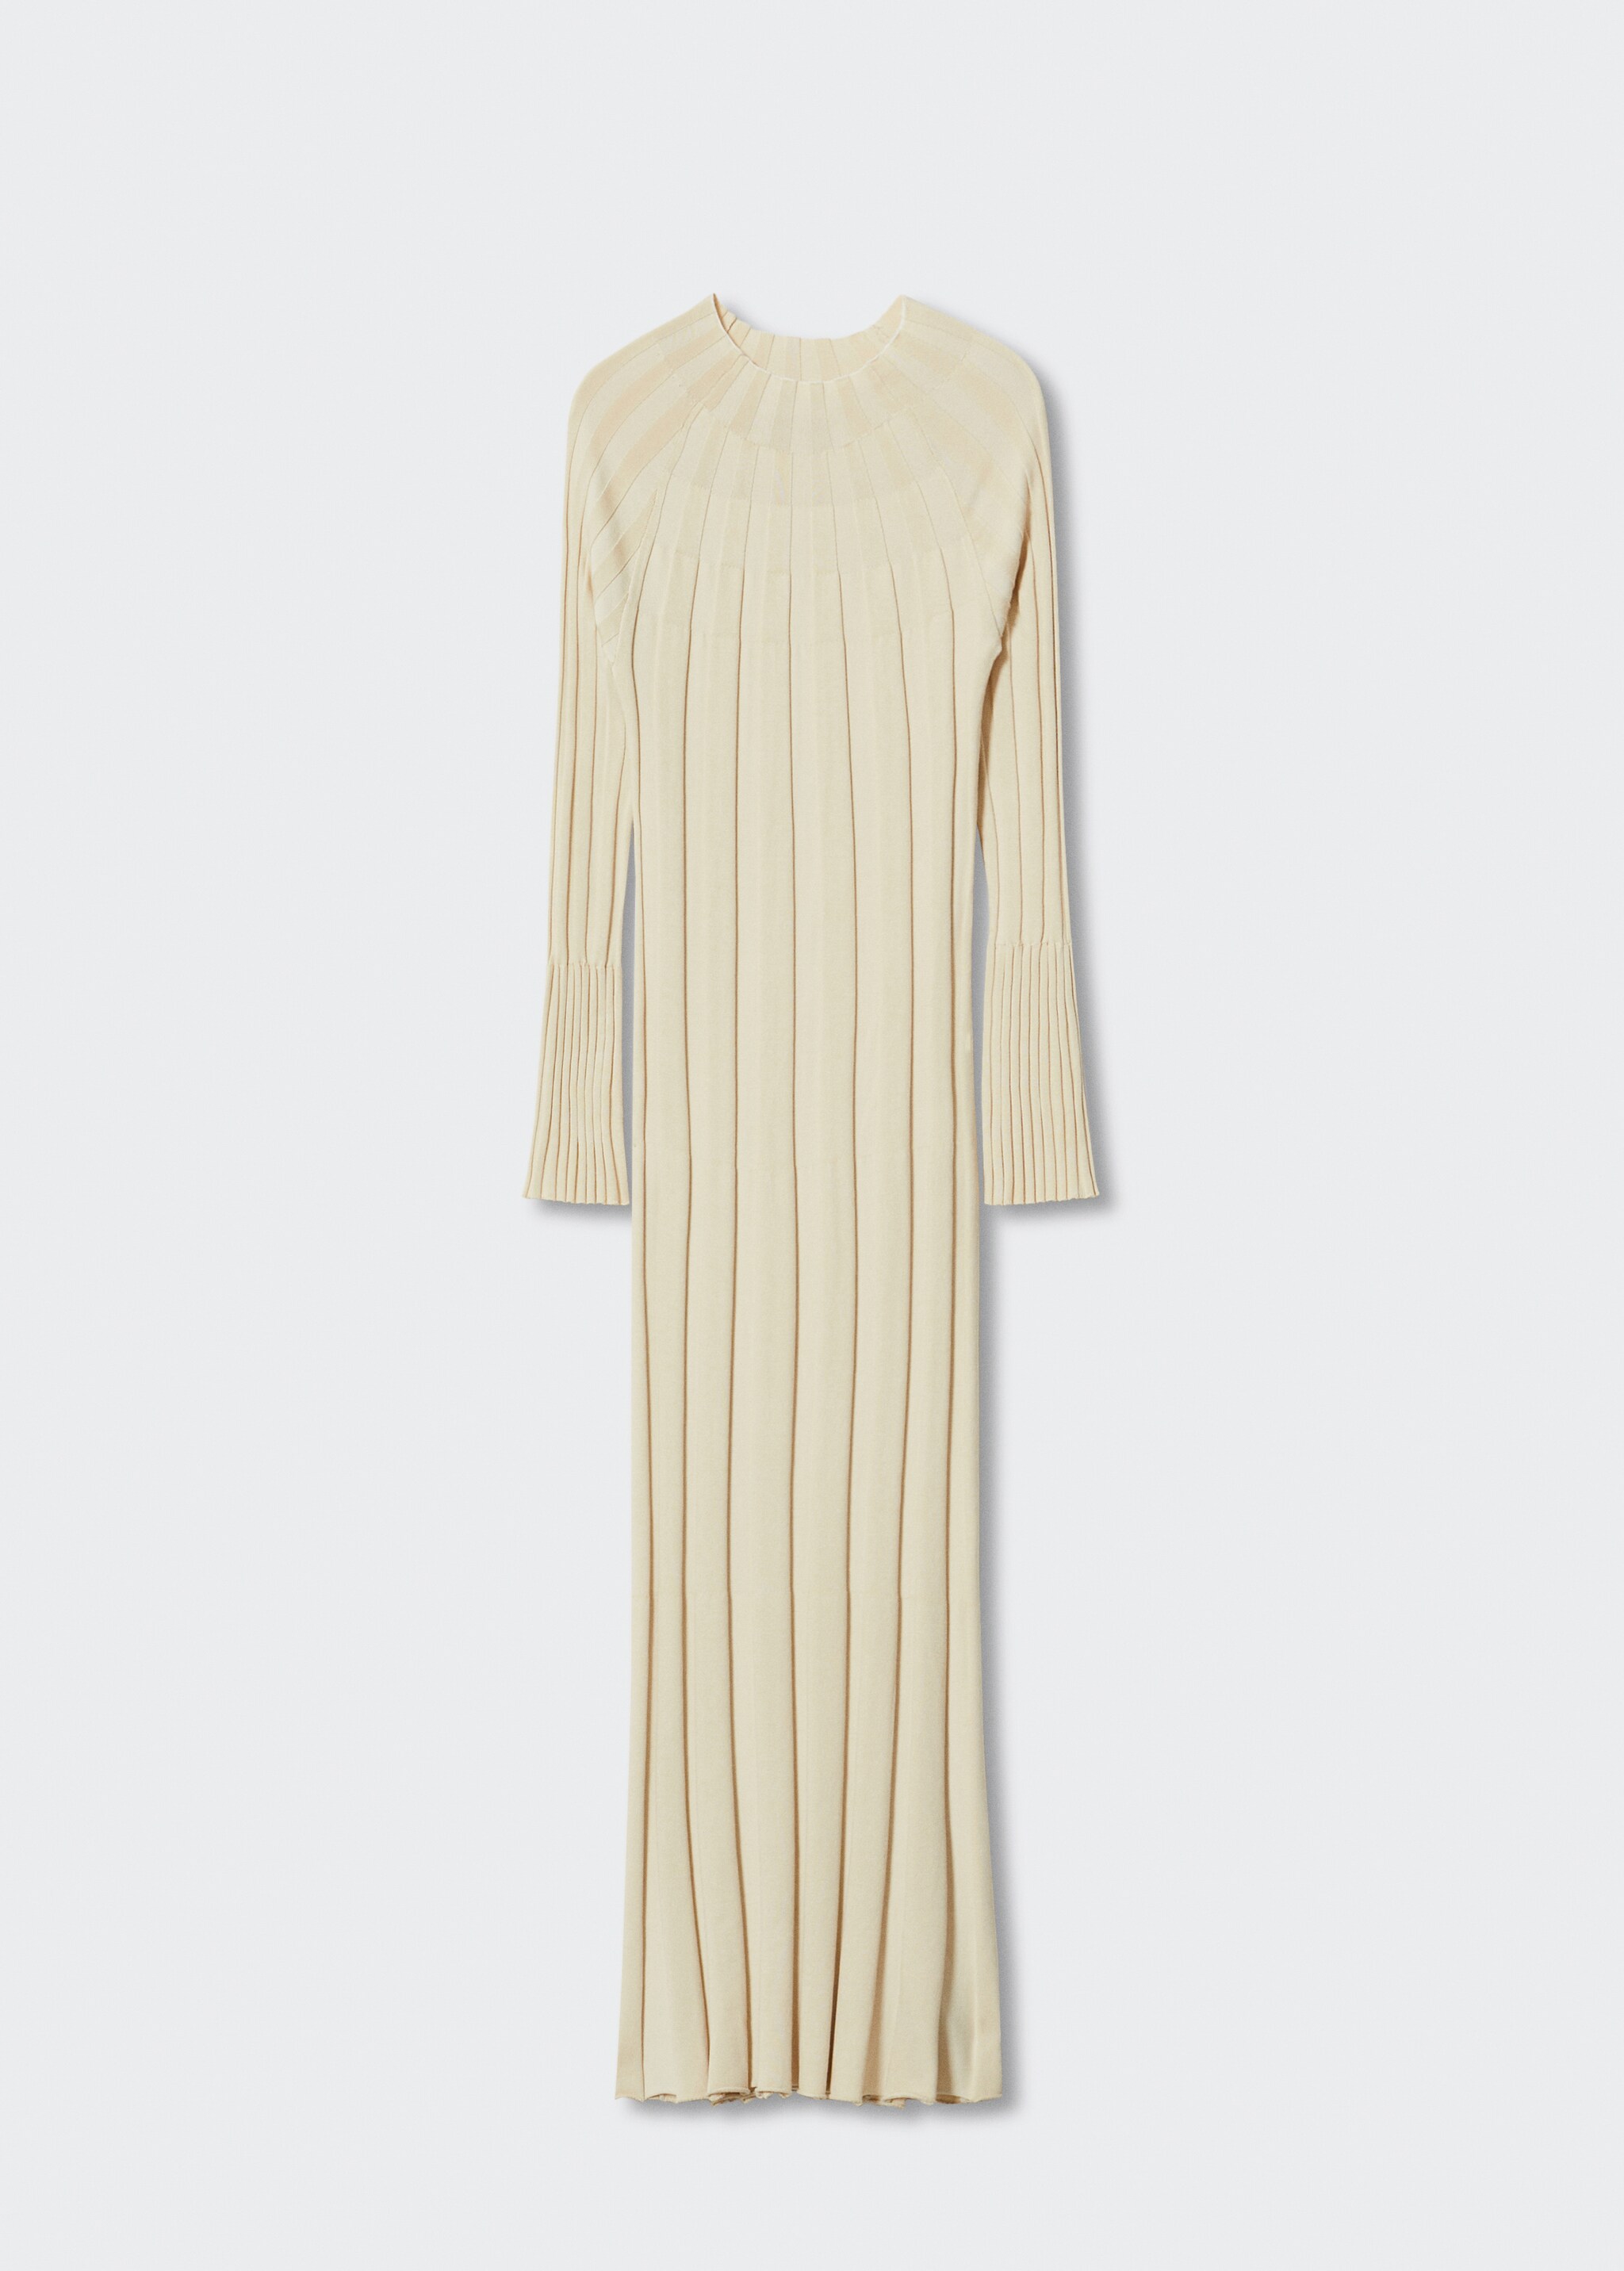 Perkins-neck ribbed dress - Article without model